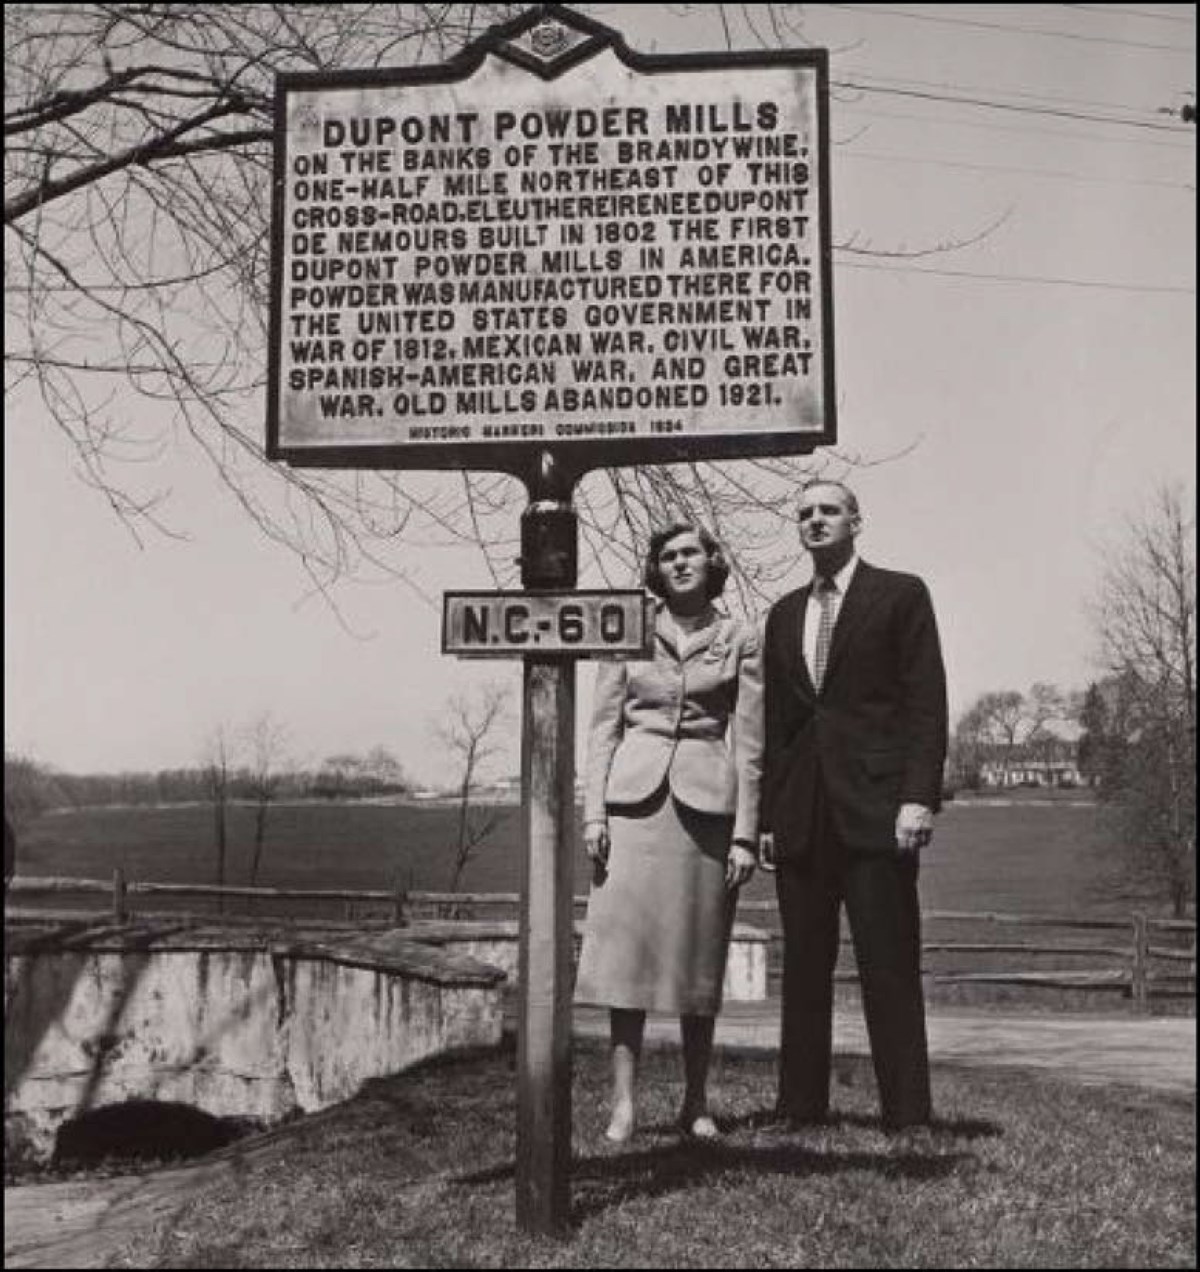 Man and woman reading Dupont Powder Mills historic roadside marker N.C. – 60. Countryside in background.